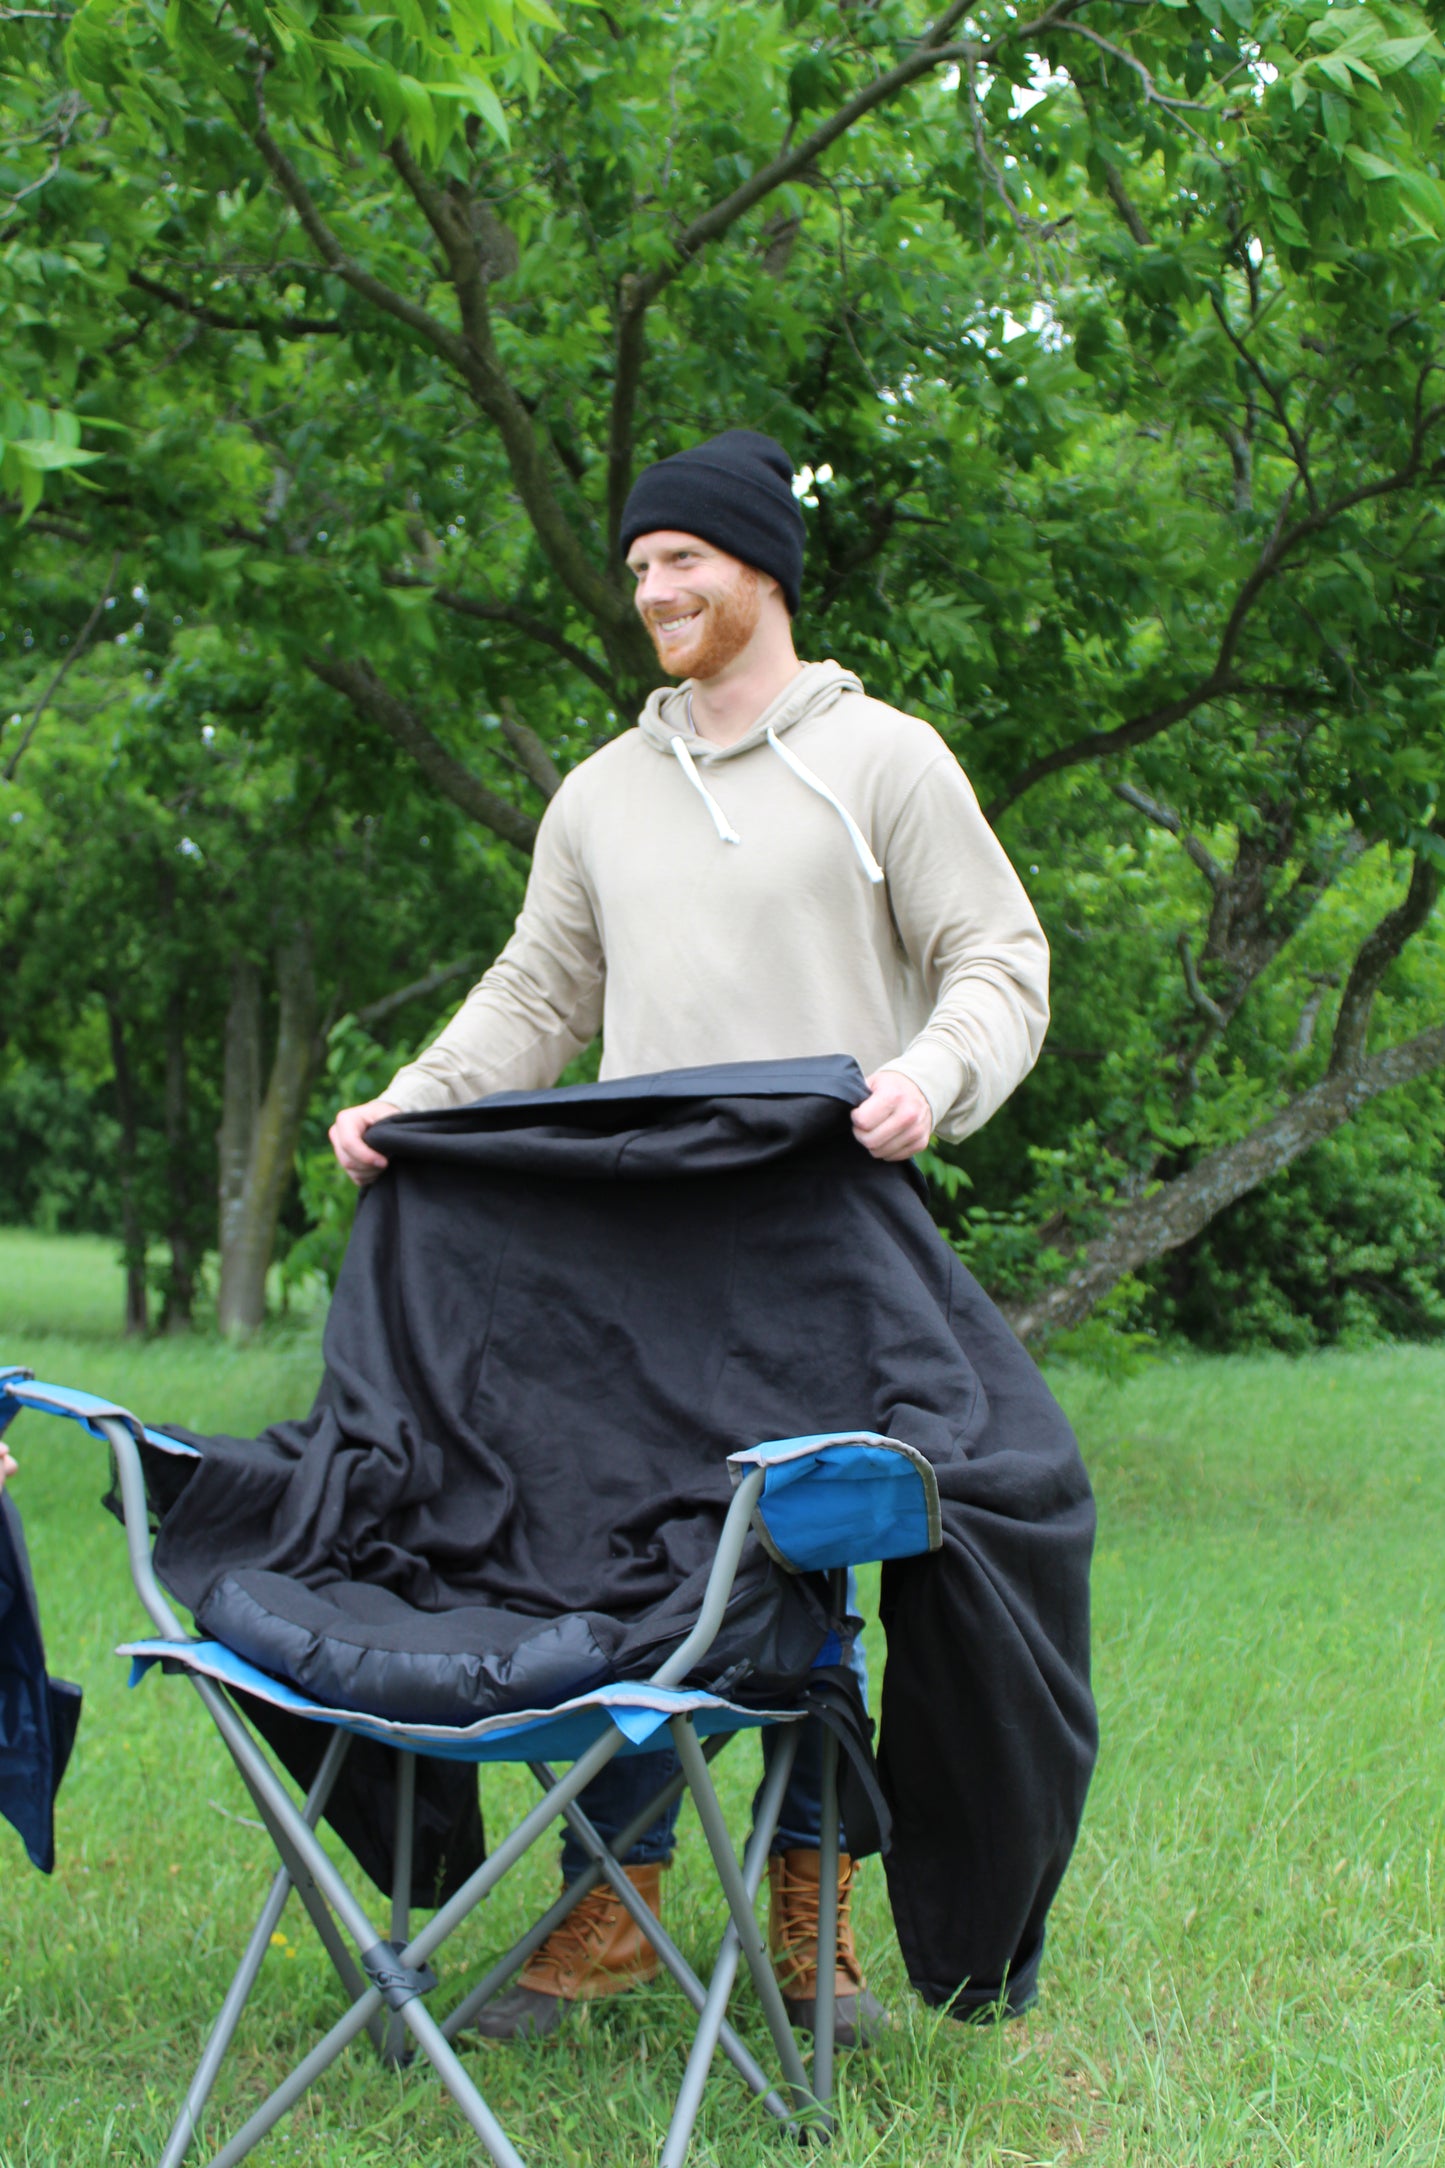 AnyWear Cushion - Fleece Interior & Weather Resistant Exterior - Fiber Filled - 5 Colors Available